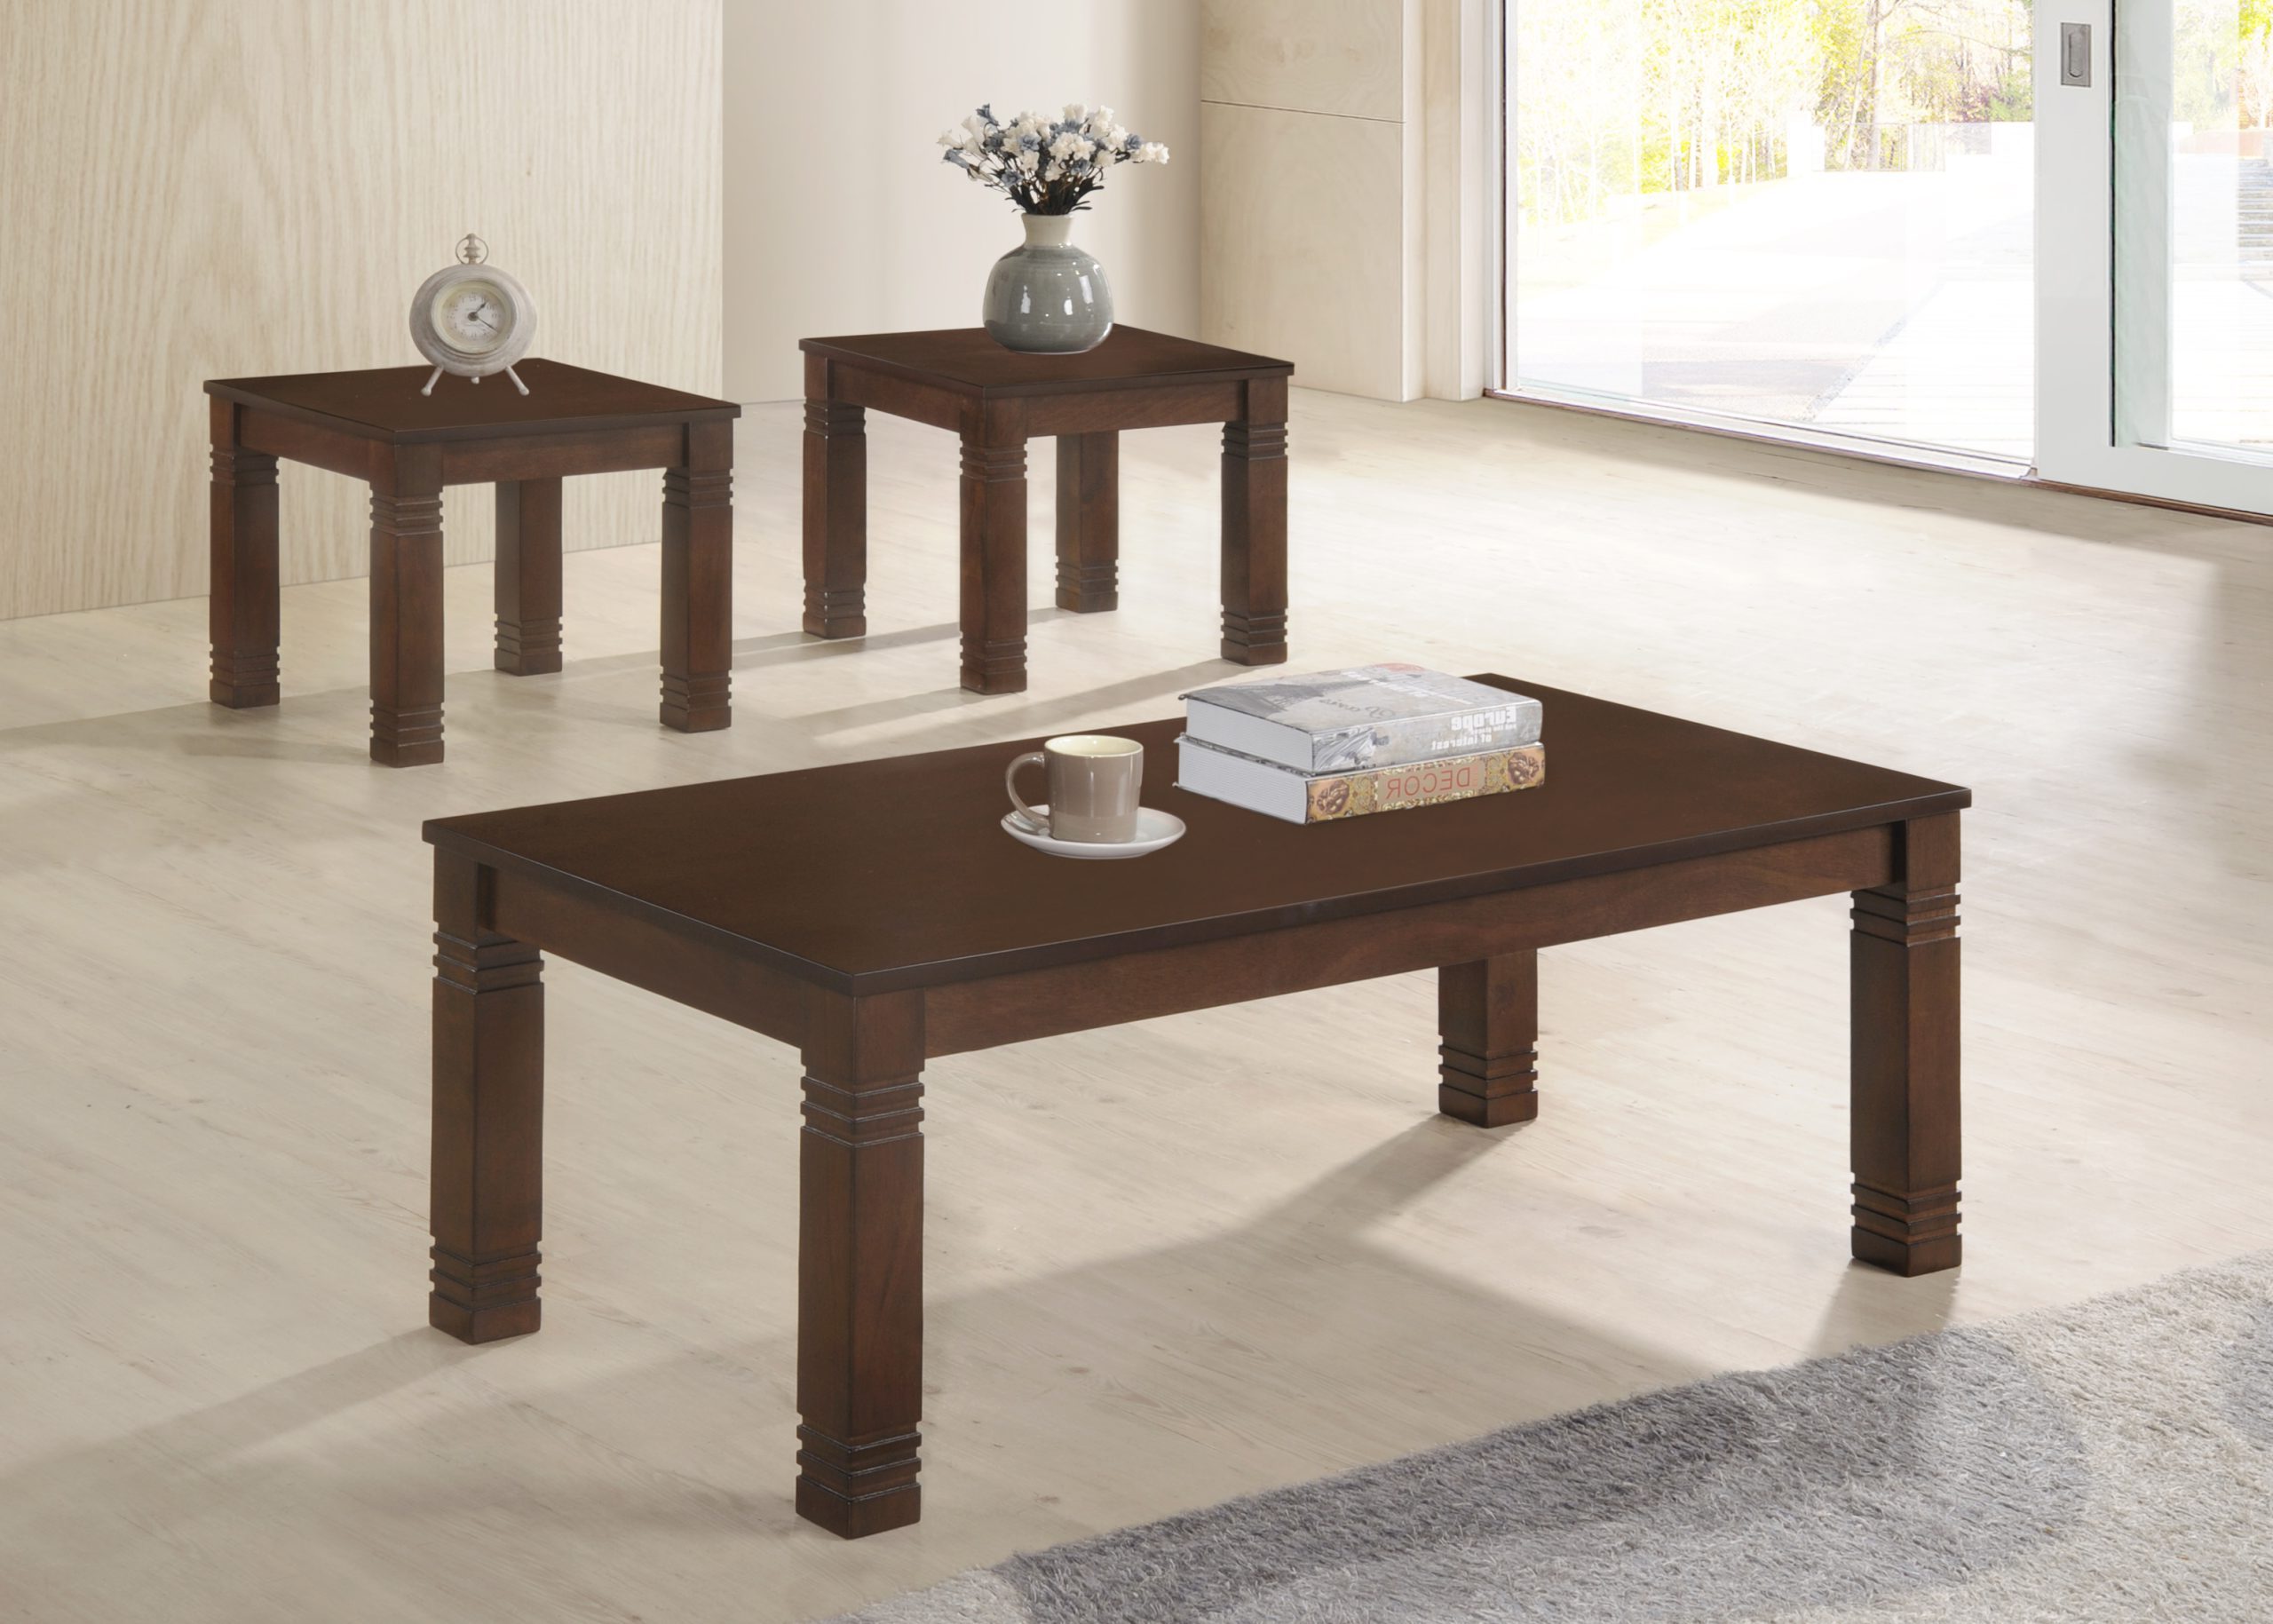 Burberry Coffee Table With 2 Stools | Neilan Furniture Kenya